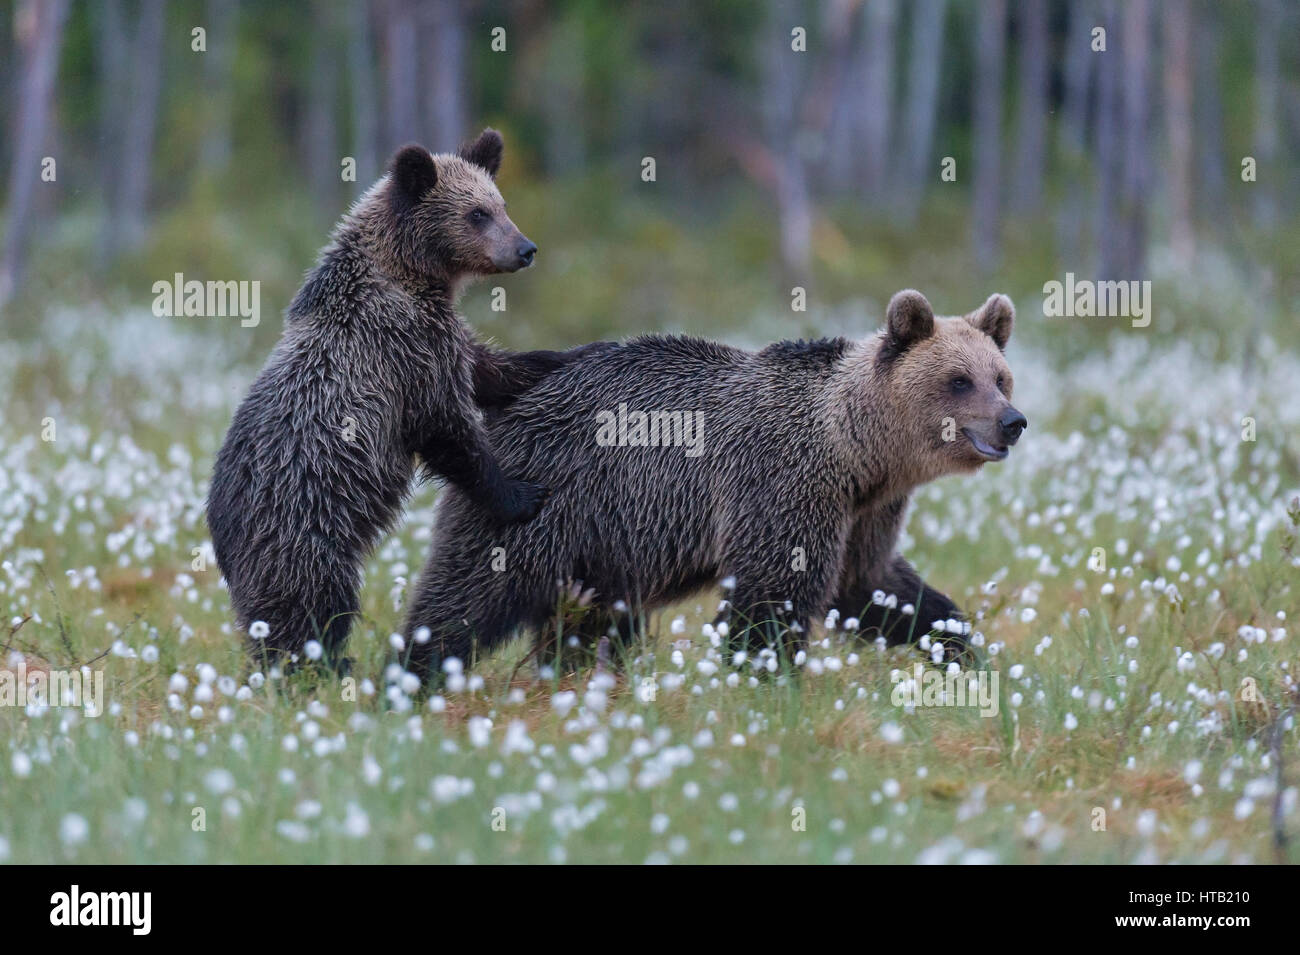 Brown bear with young animal, Braunbaer mit Jungtier Stock Photo